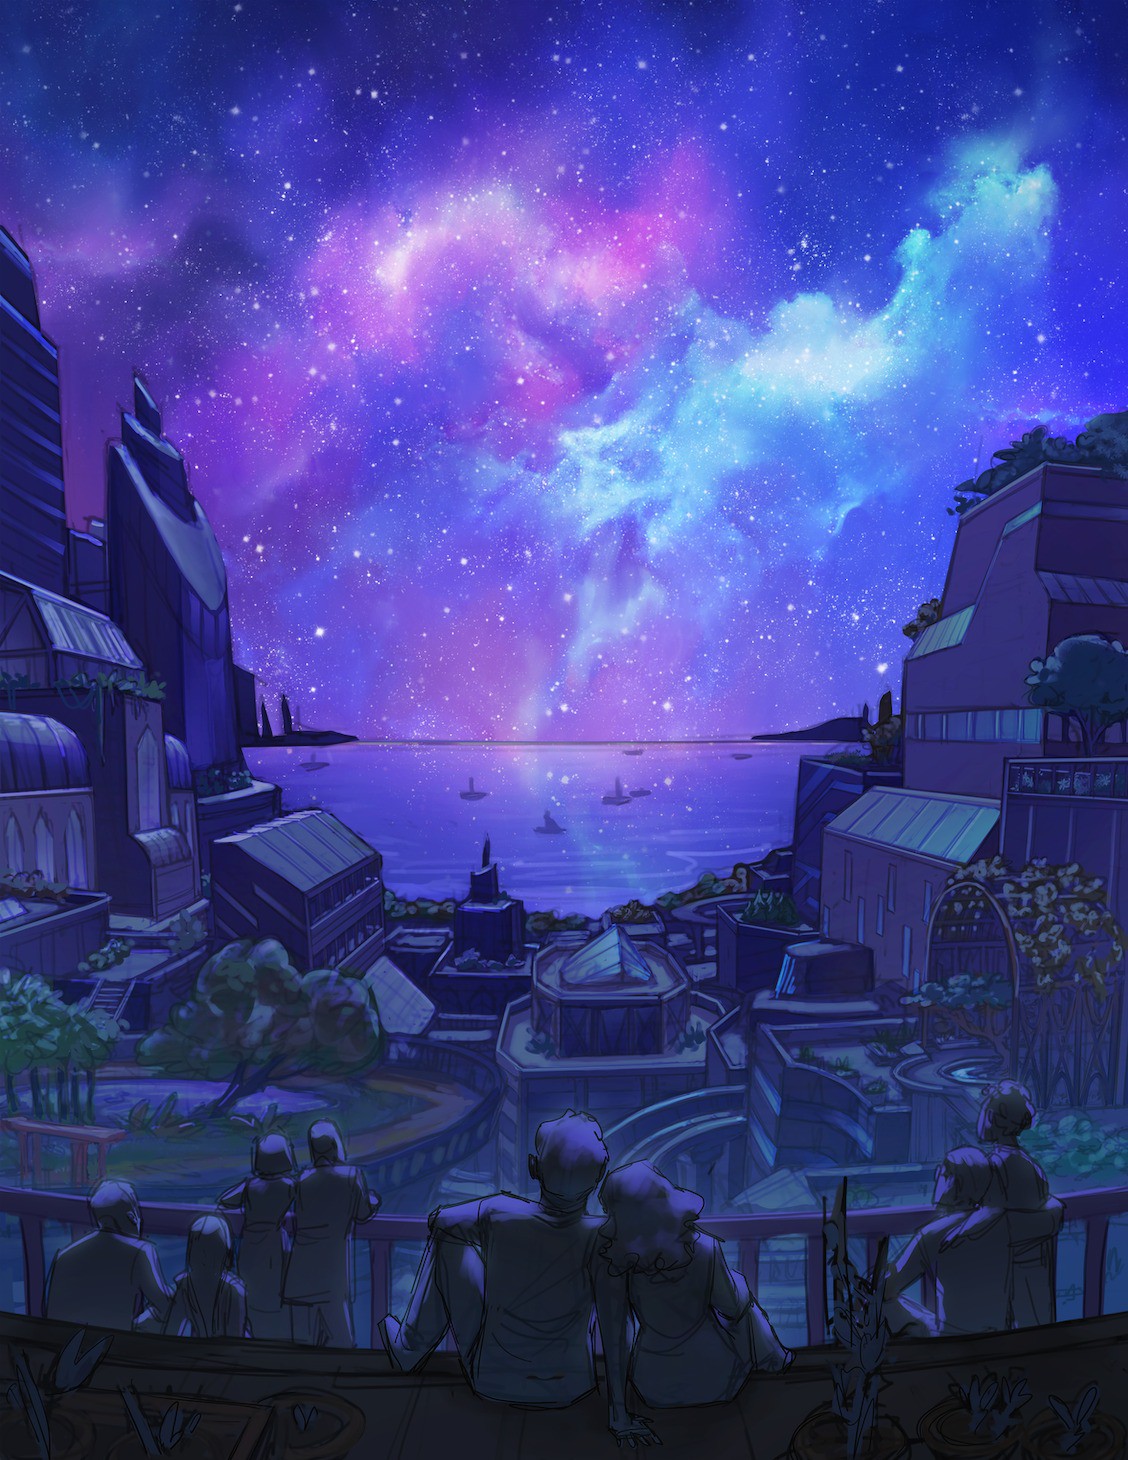 Illustration of futuristic buildings leading out onto a darkened harbour at night, lit by a starry purple sky.